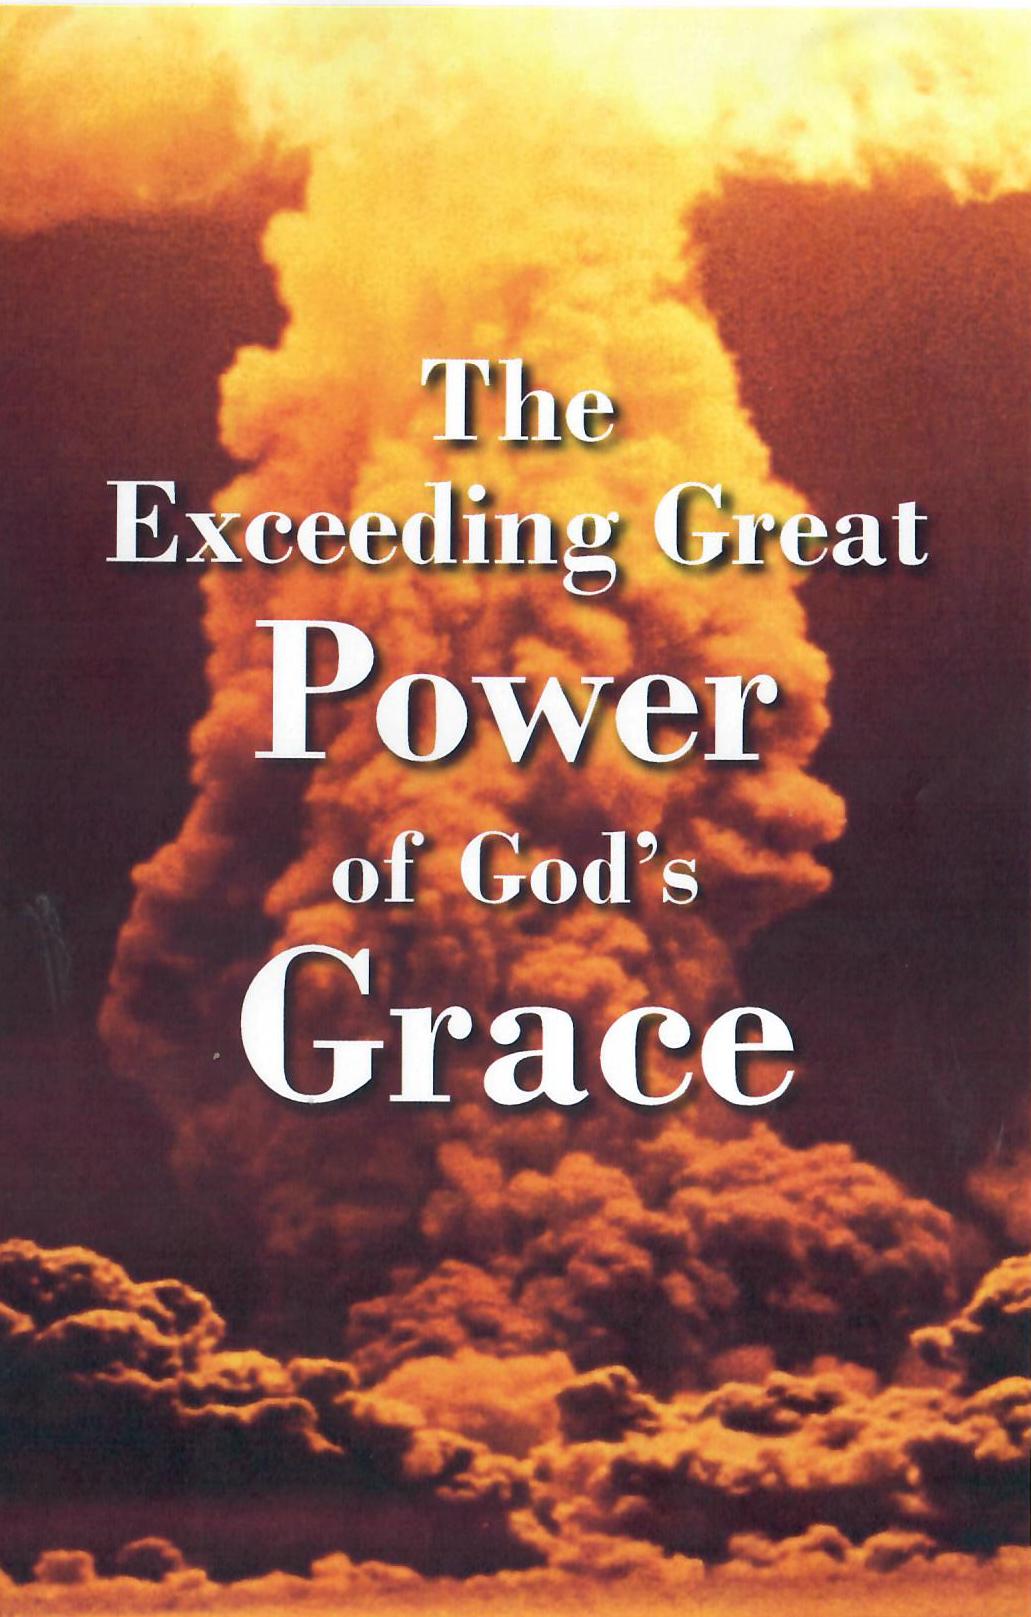 The Exceeding Great Power of God’s Grace